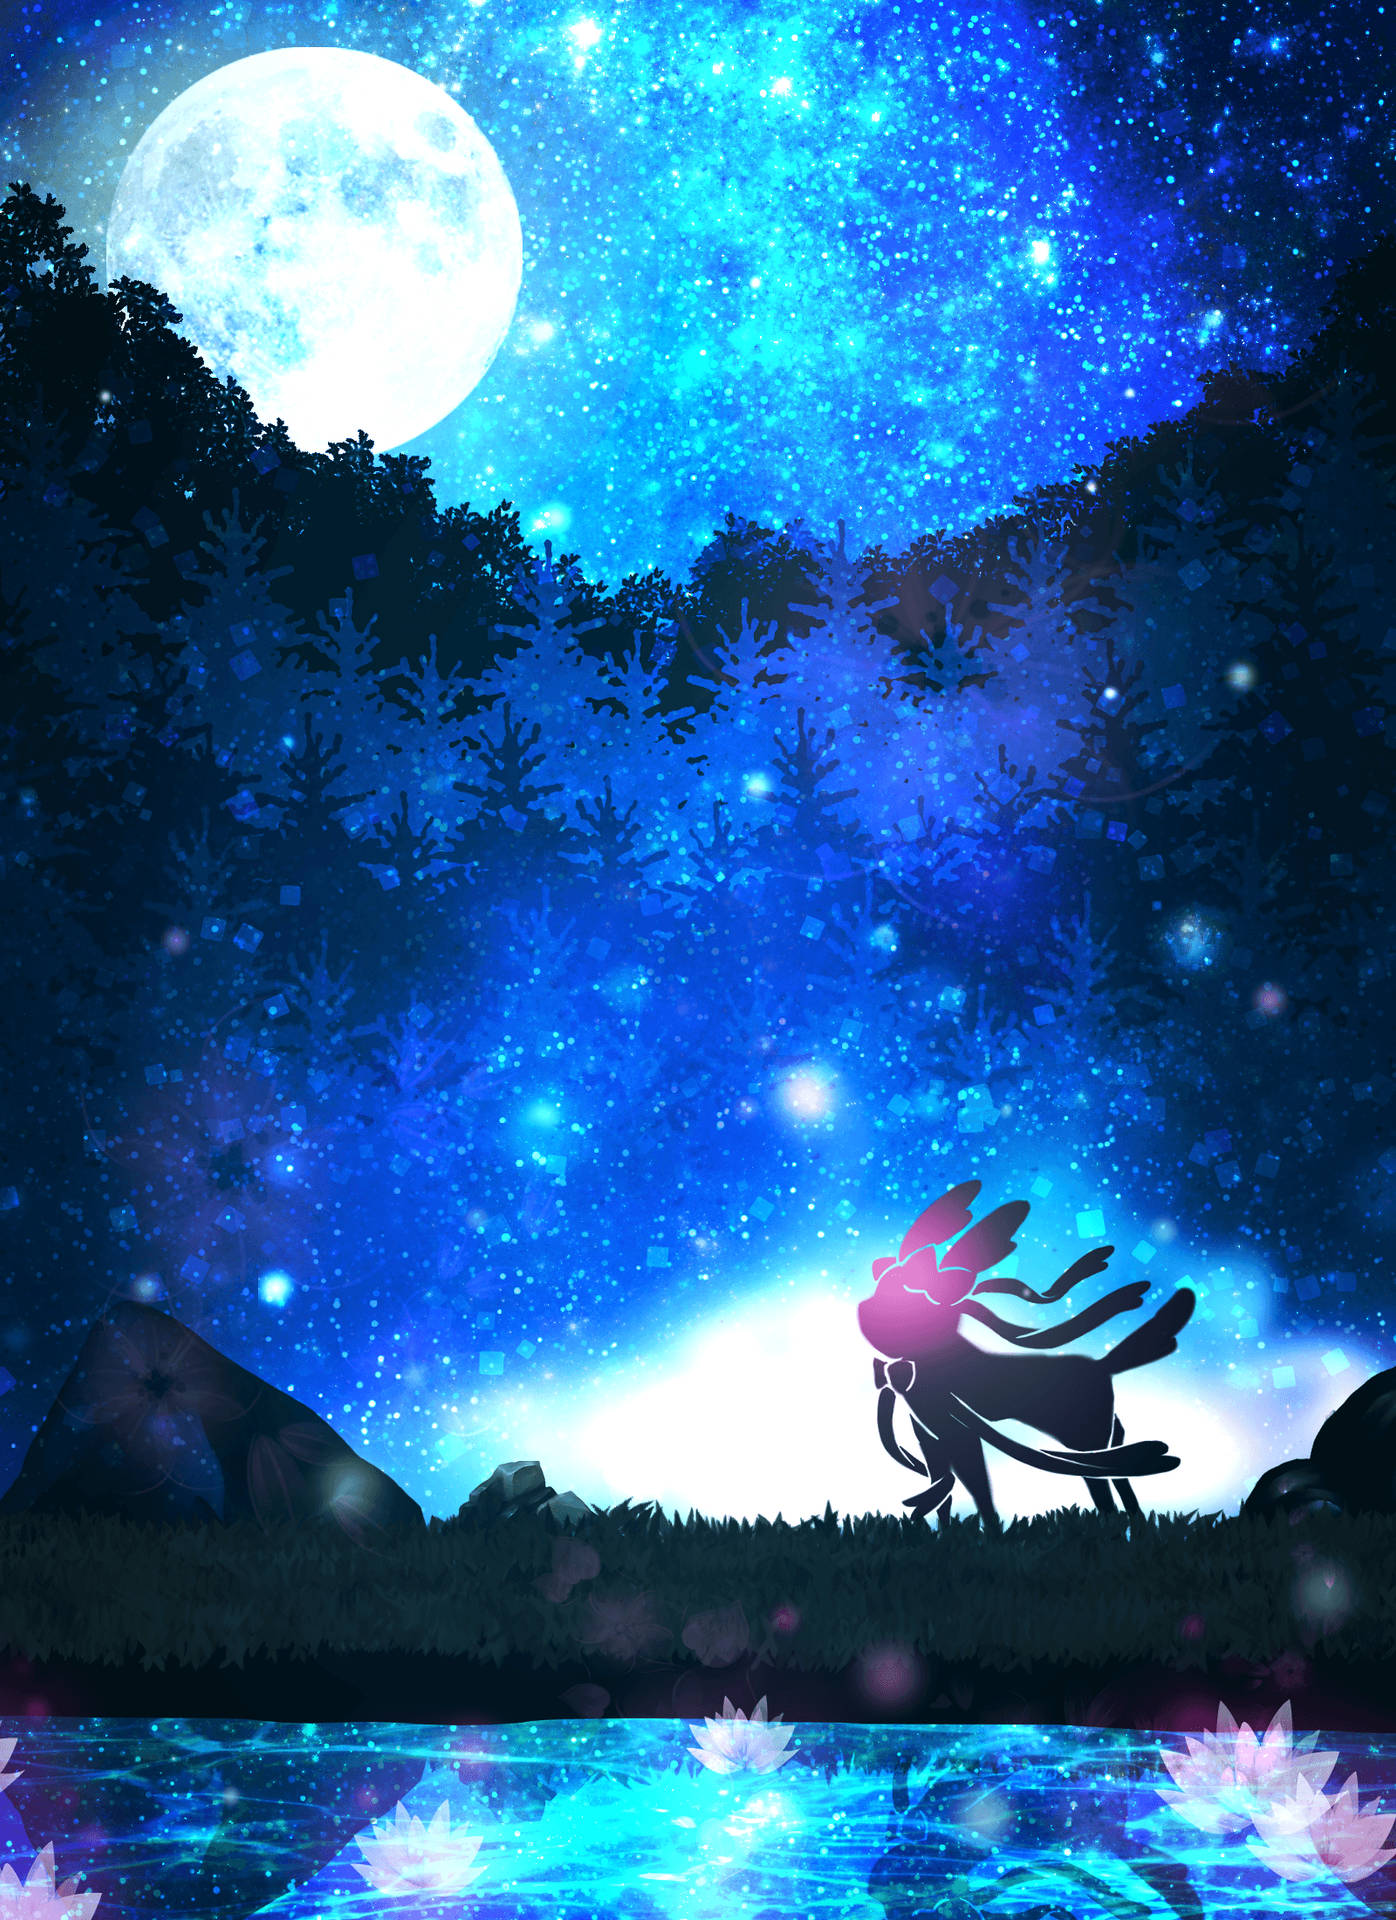 The starry skies of Sylveon. Wallpaper